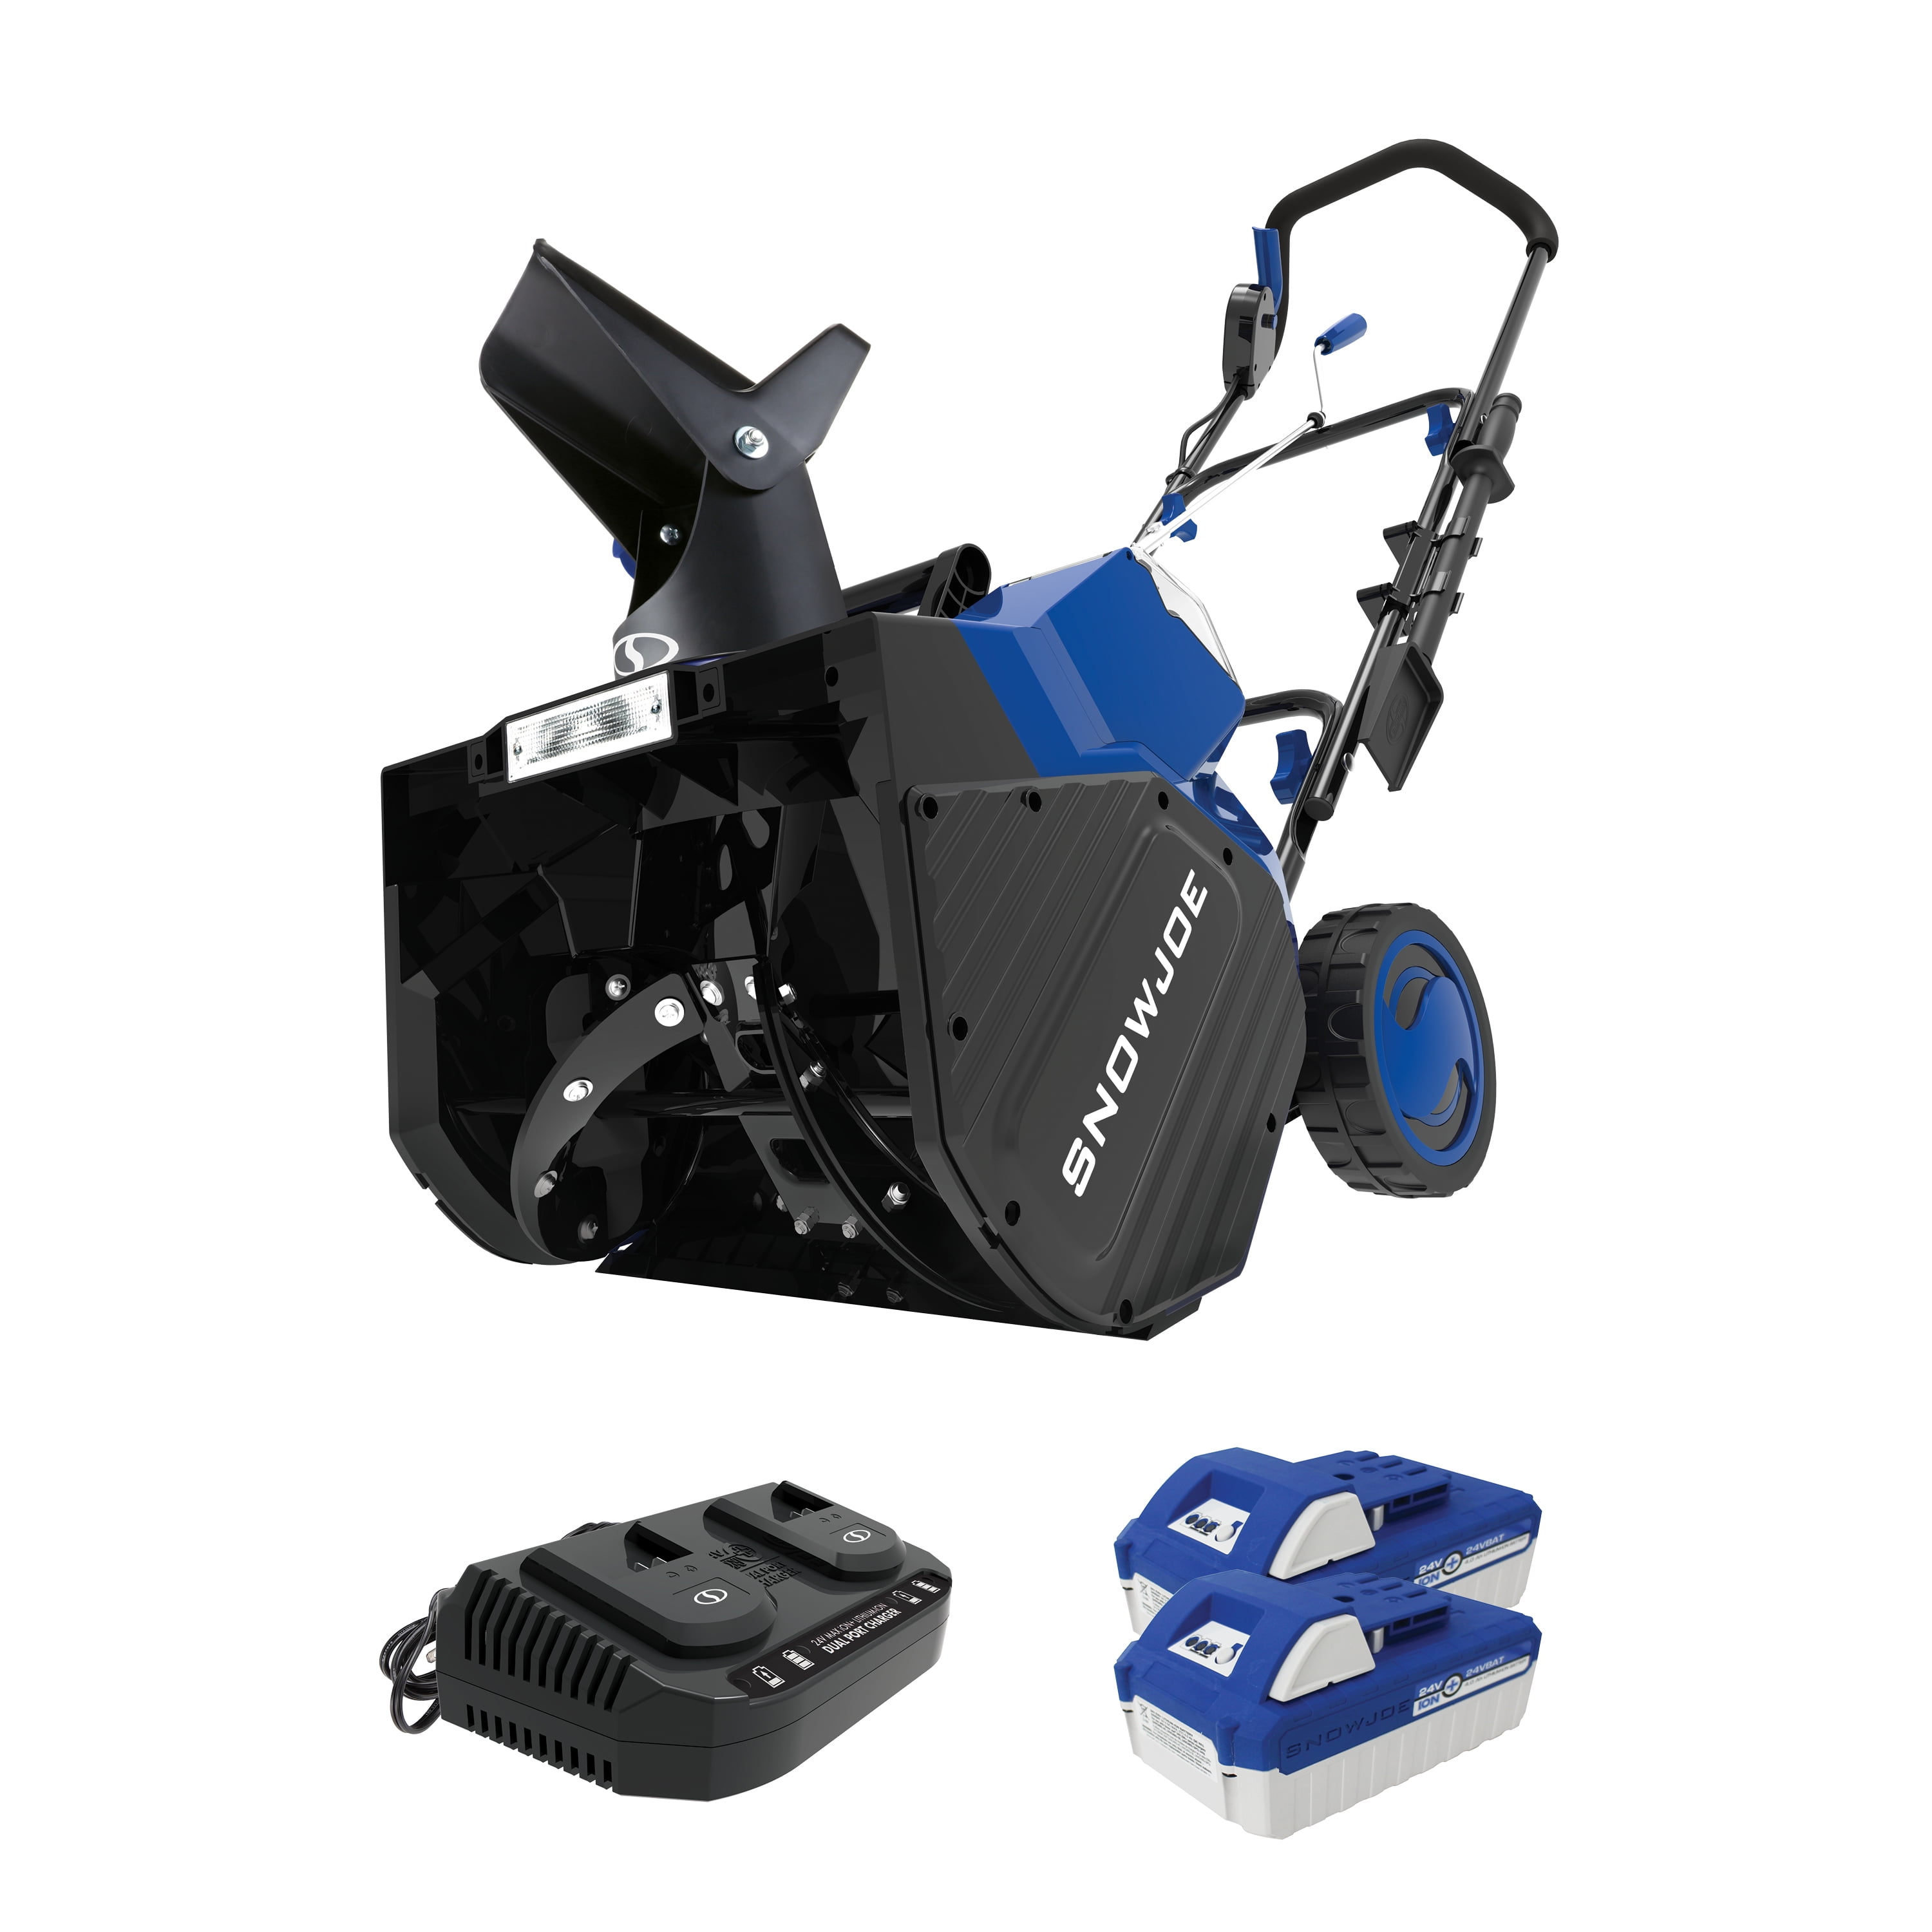 Snow Joe 48V 18-inch Single-Stage Cordless Snow Blower W/ Headlight, Brushless 1200W Motor, 2 x 4.0-Ah Batteries & Charger - image 3 of 18